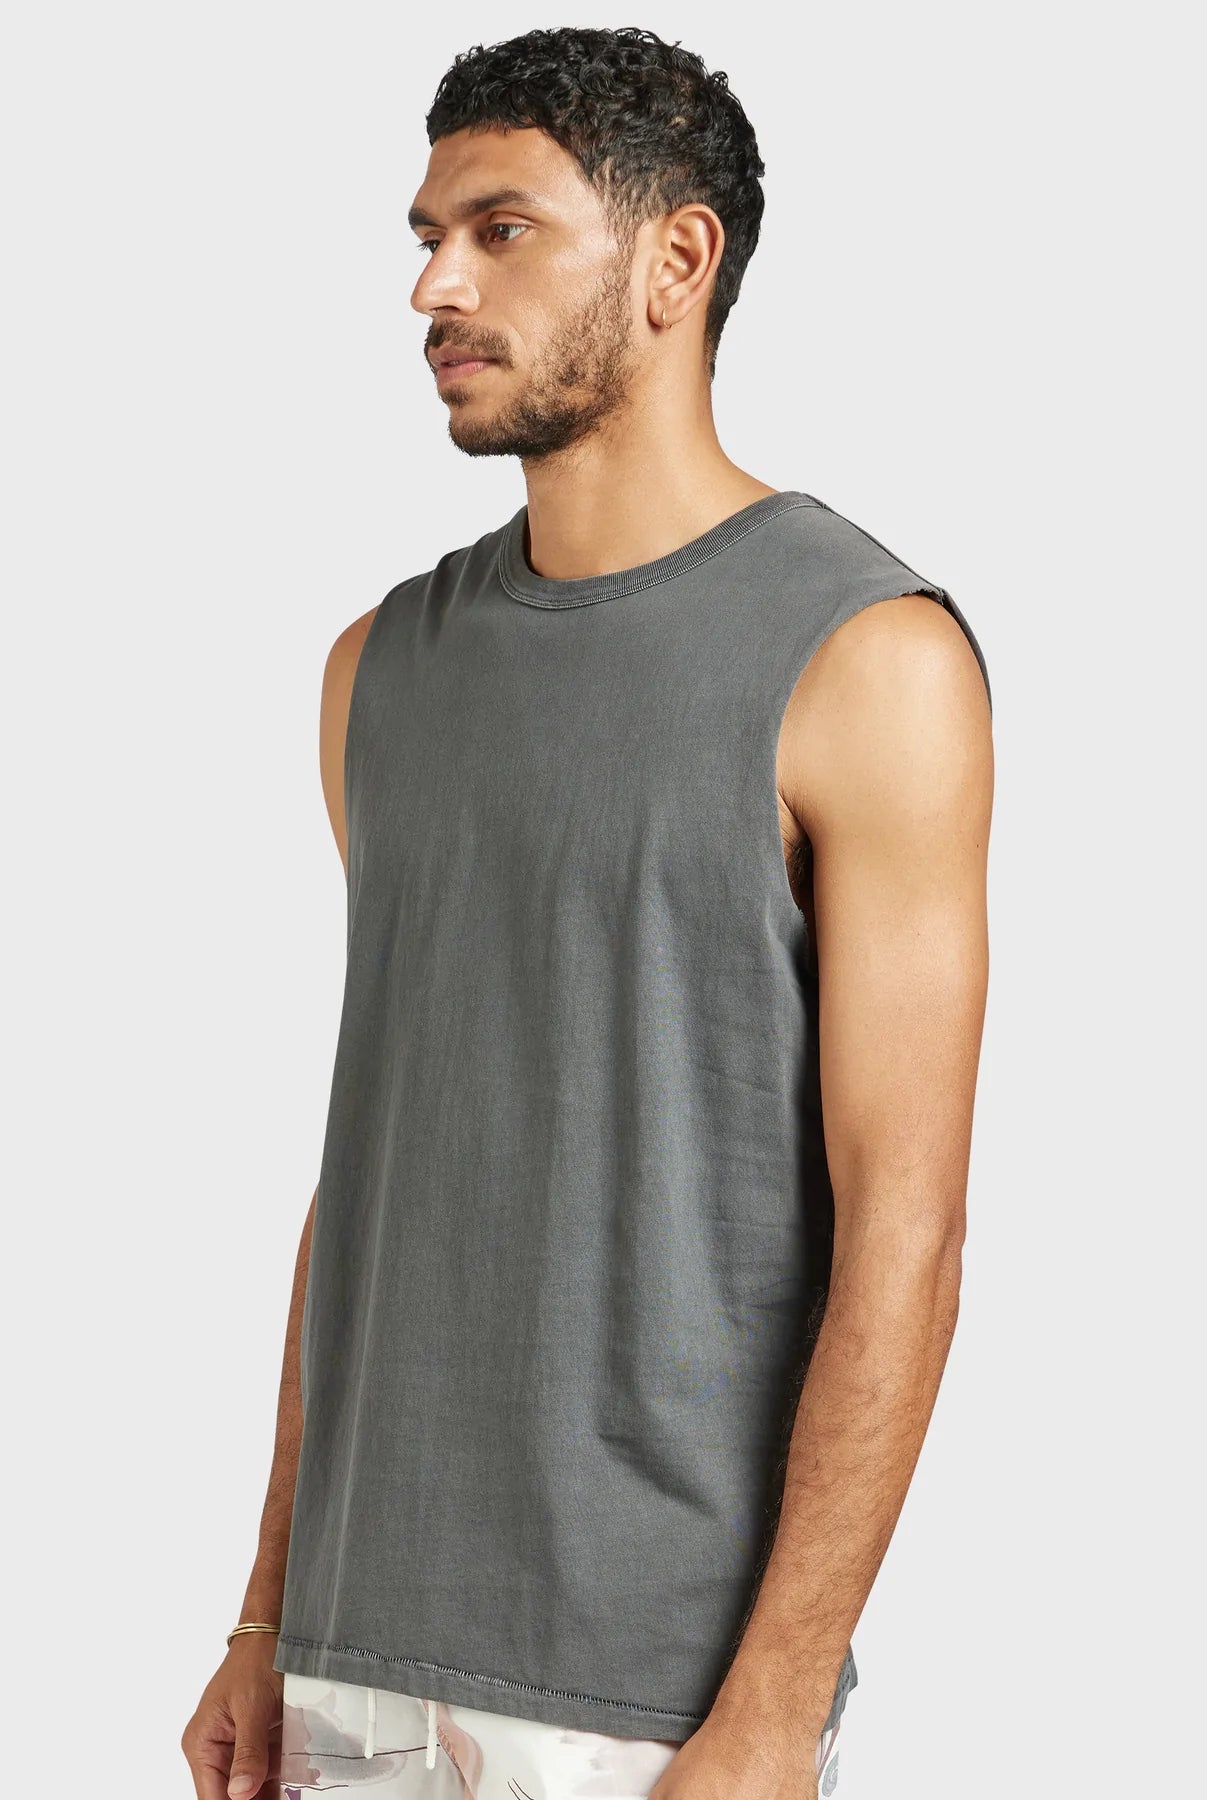 Jimmy Muscle Tee in Magnet Grey